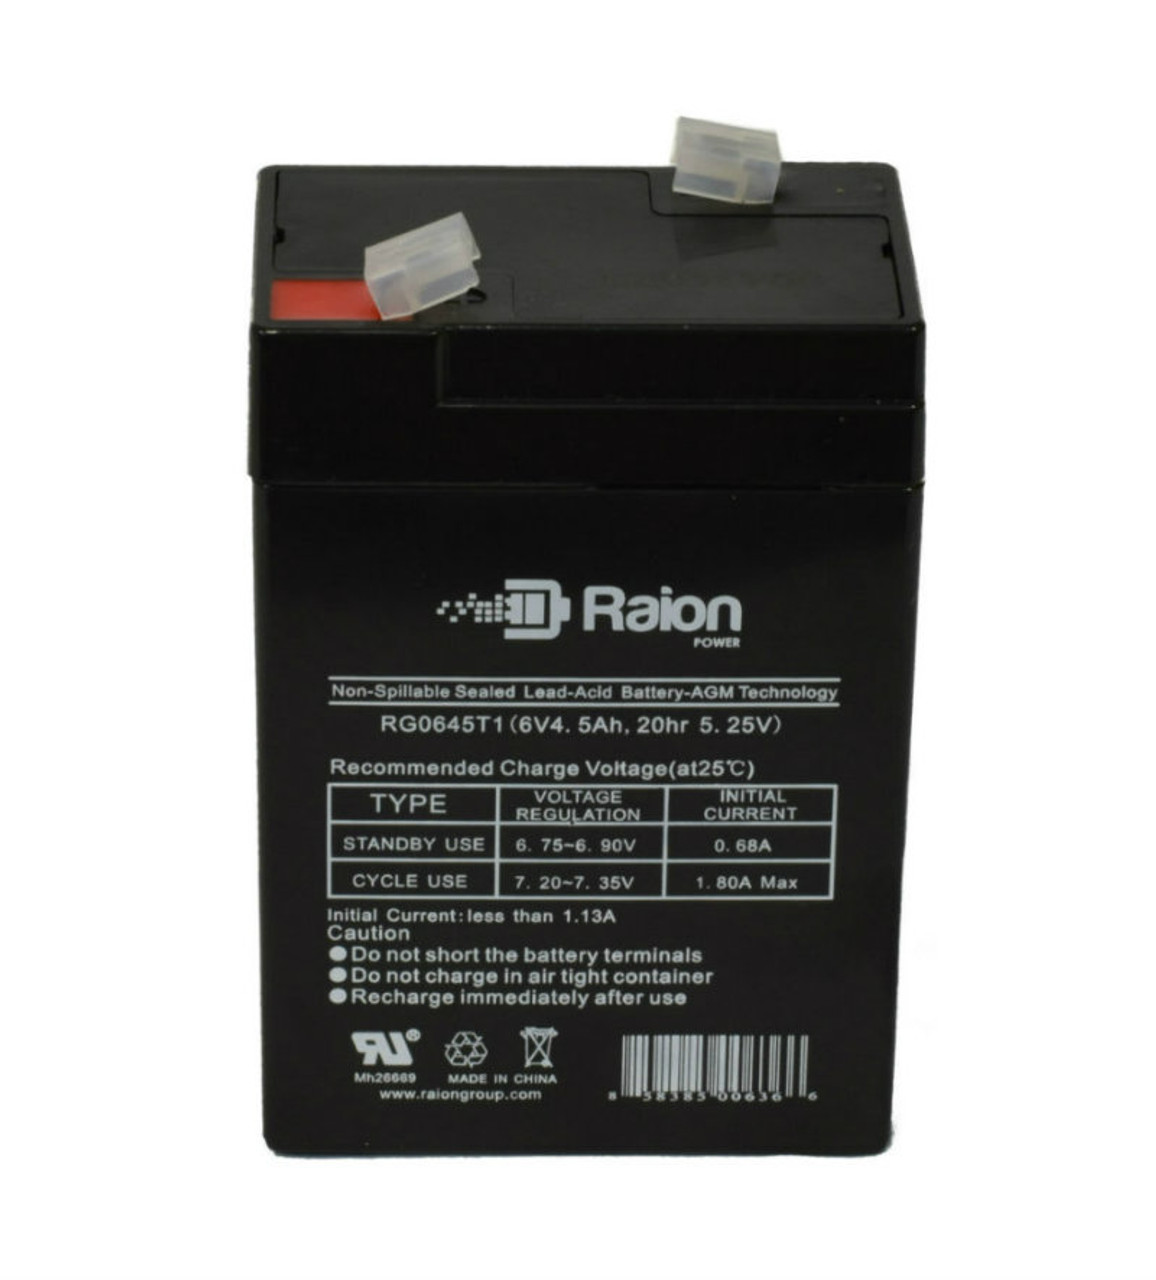 Raion Power RG0645T1 Replacement Battery Cartridge for Criticare Systems 502, 504, 506 Pulse Oximeter